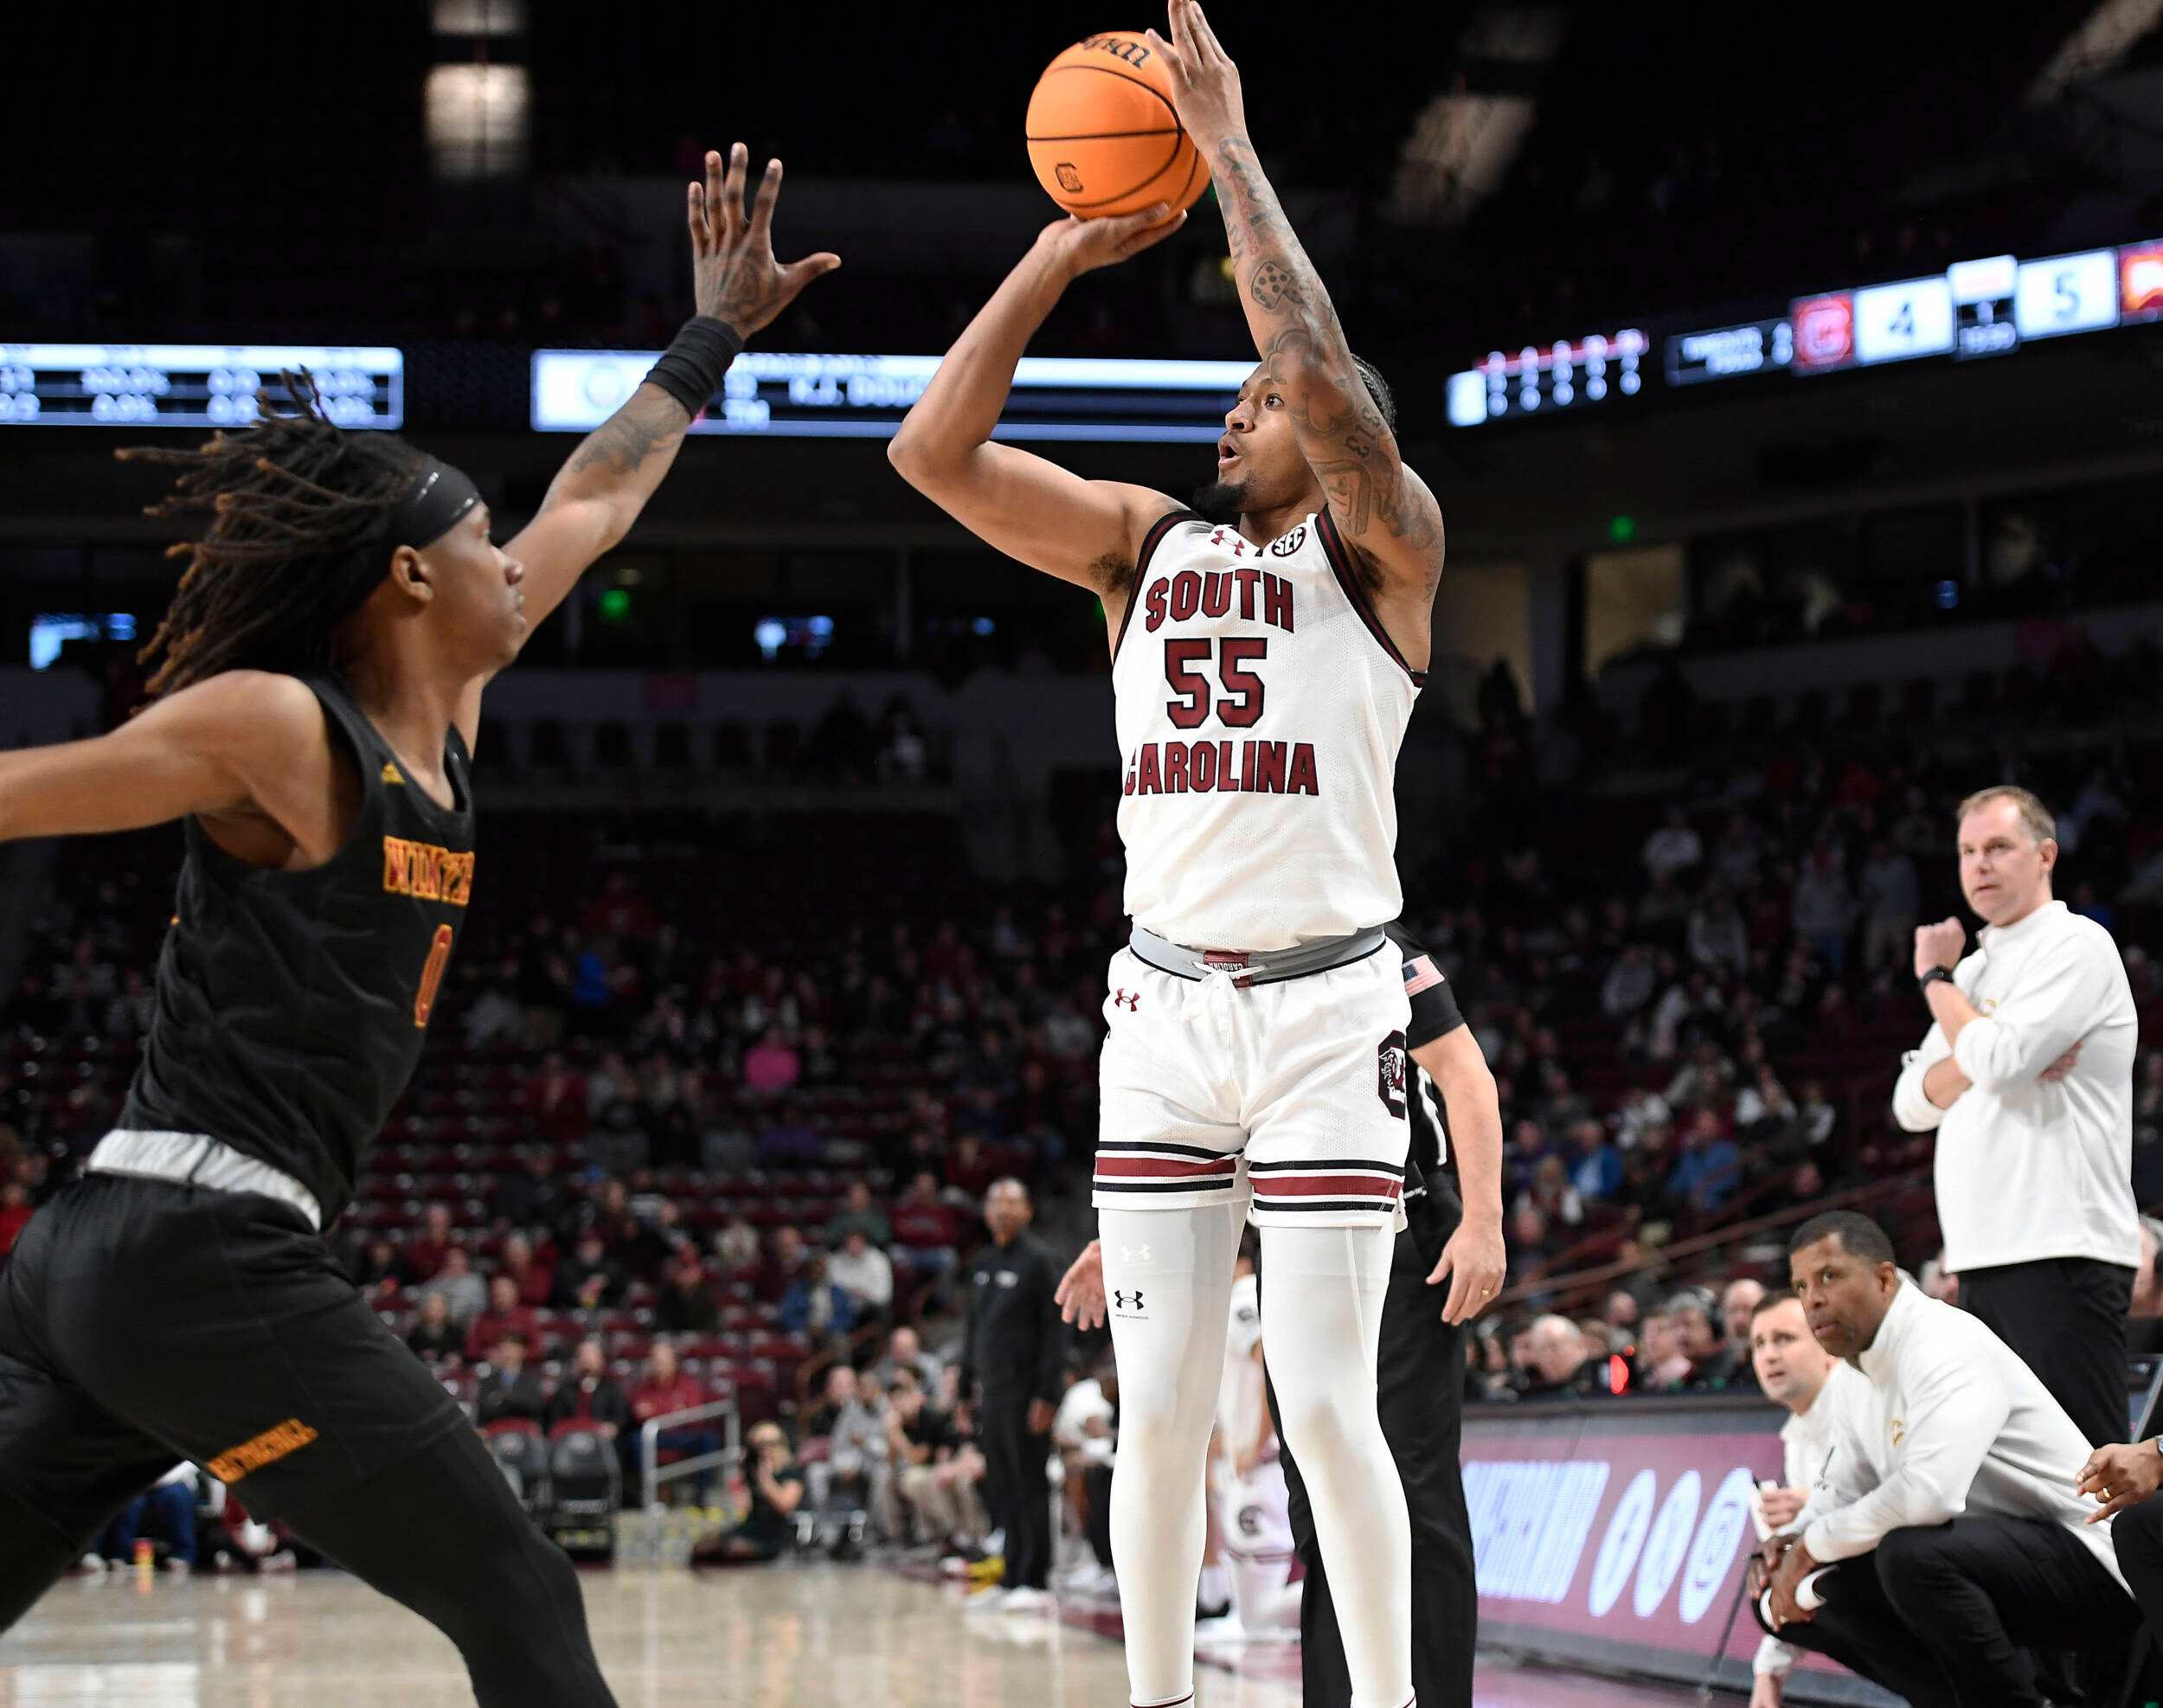 Johnson Scores 20 as South Carolina Earns 72-62 Victory Over Winthrop